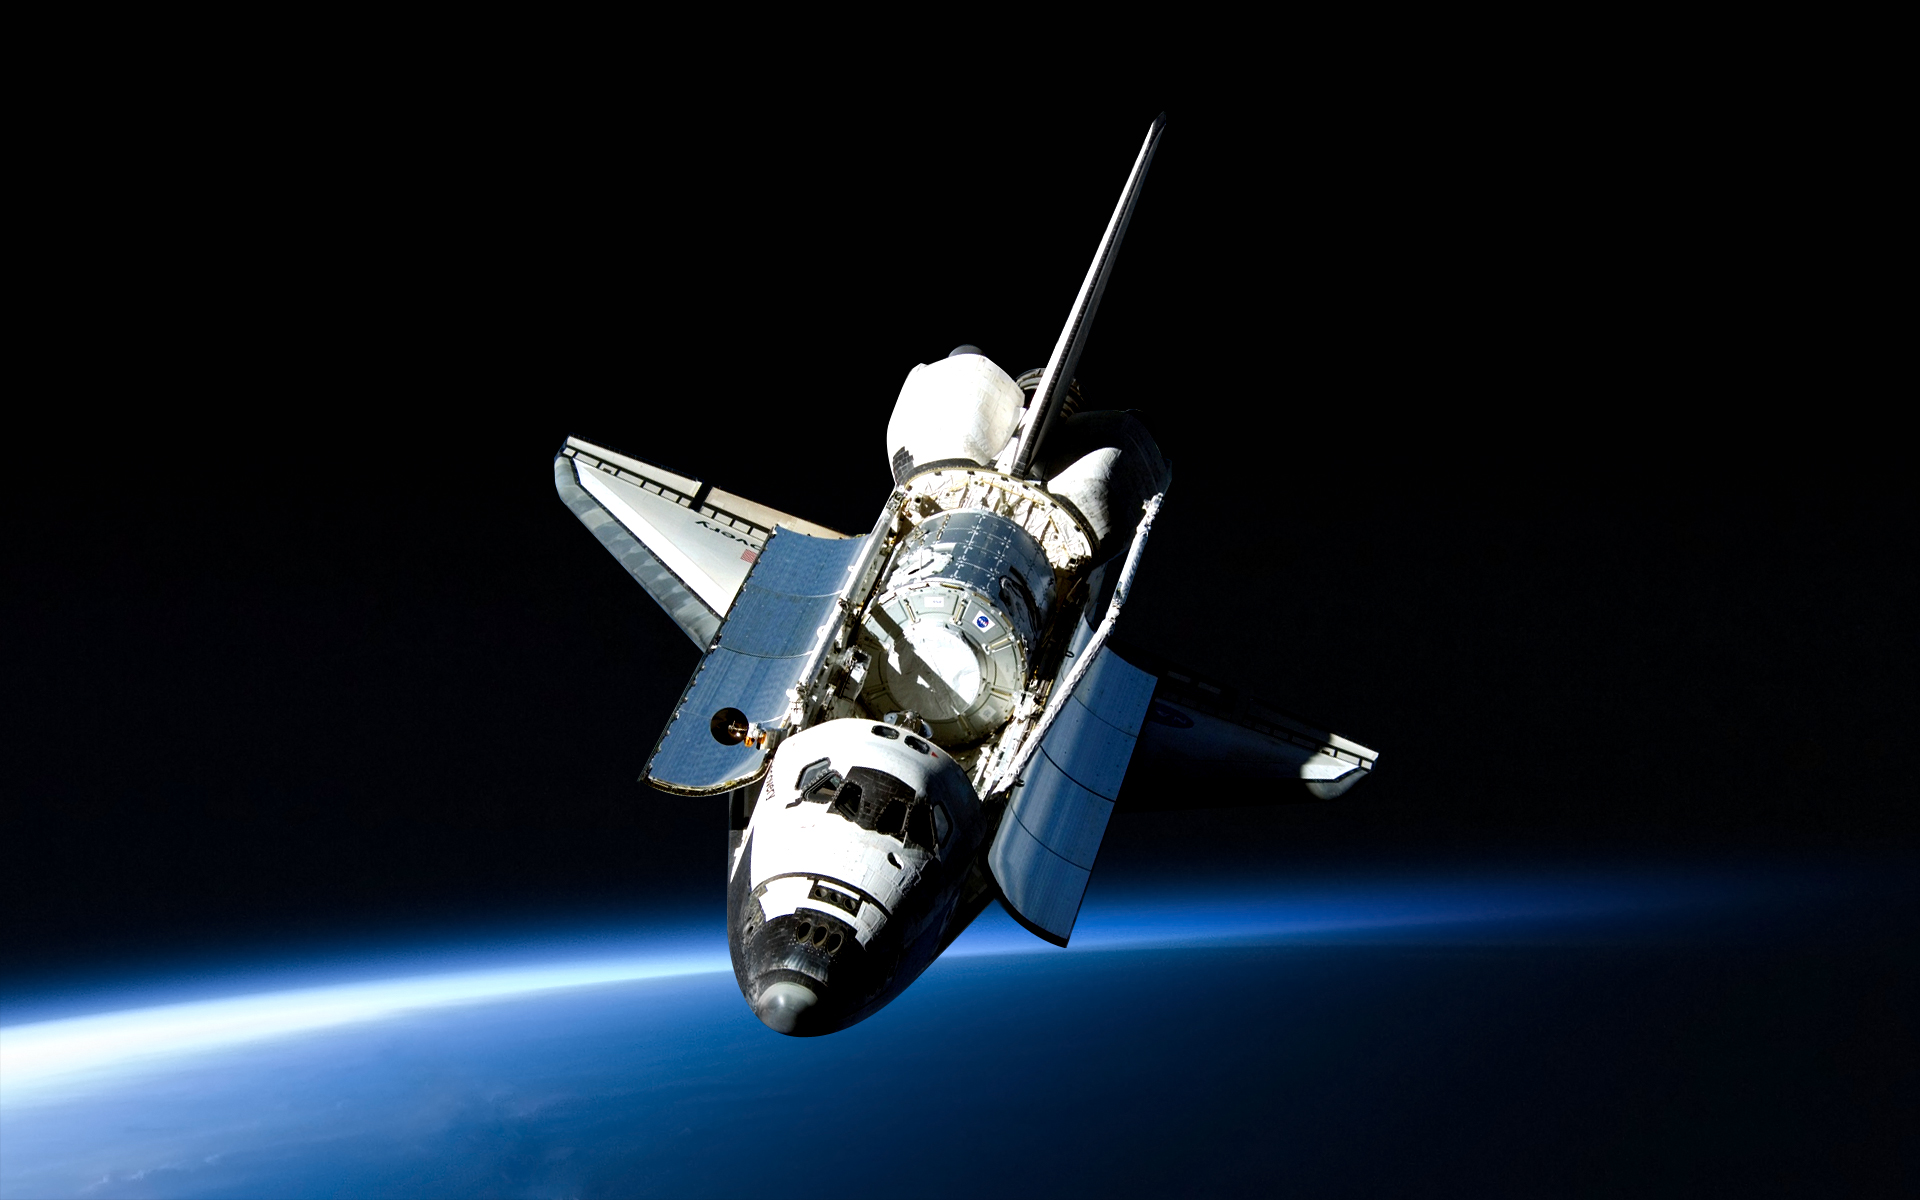 android satellite, vehicles, space shuttle discovery, space shuttle, space, space shuttles